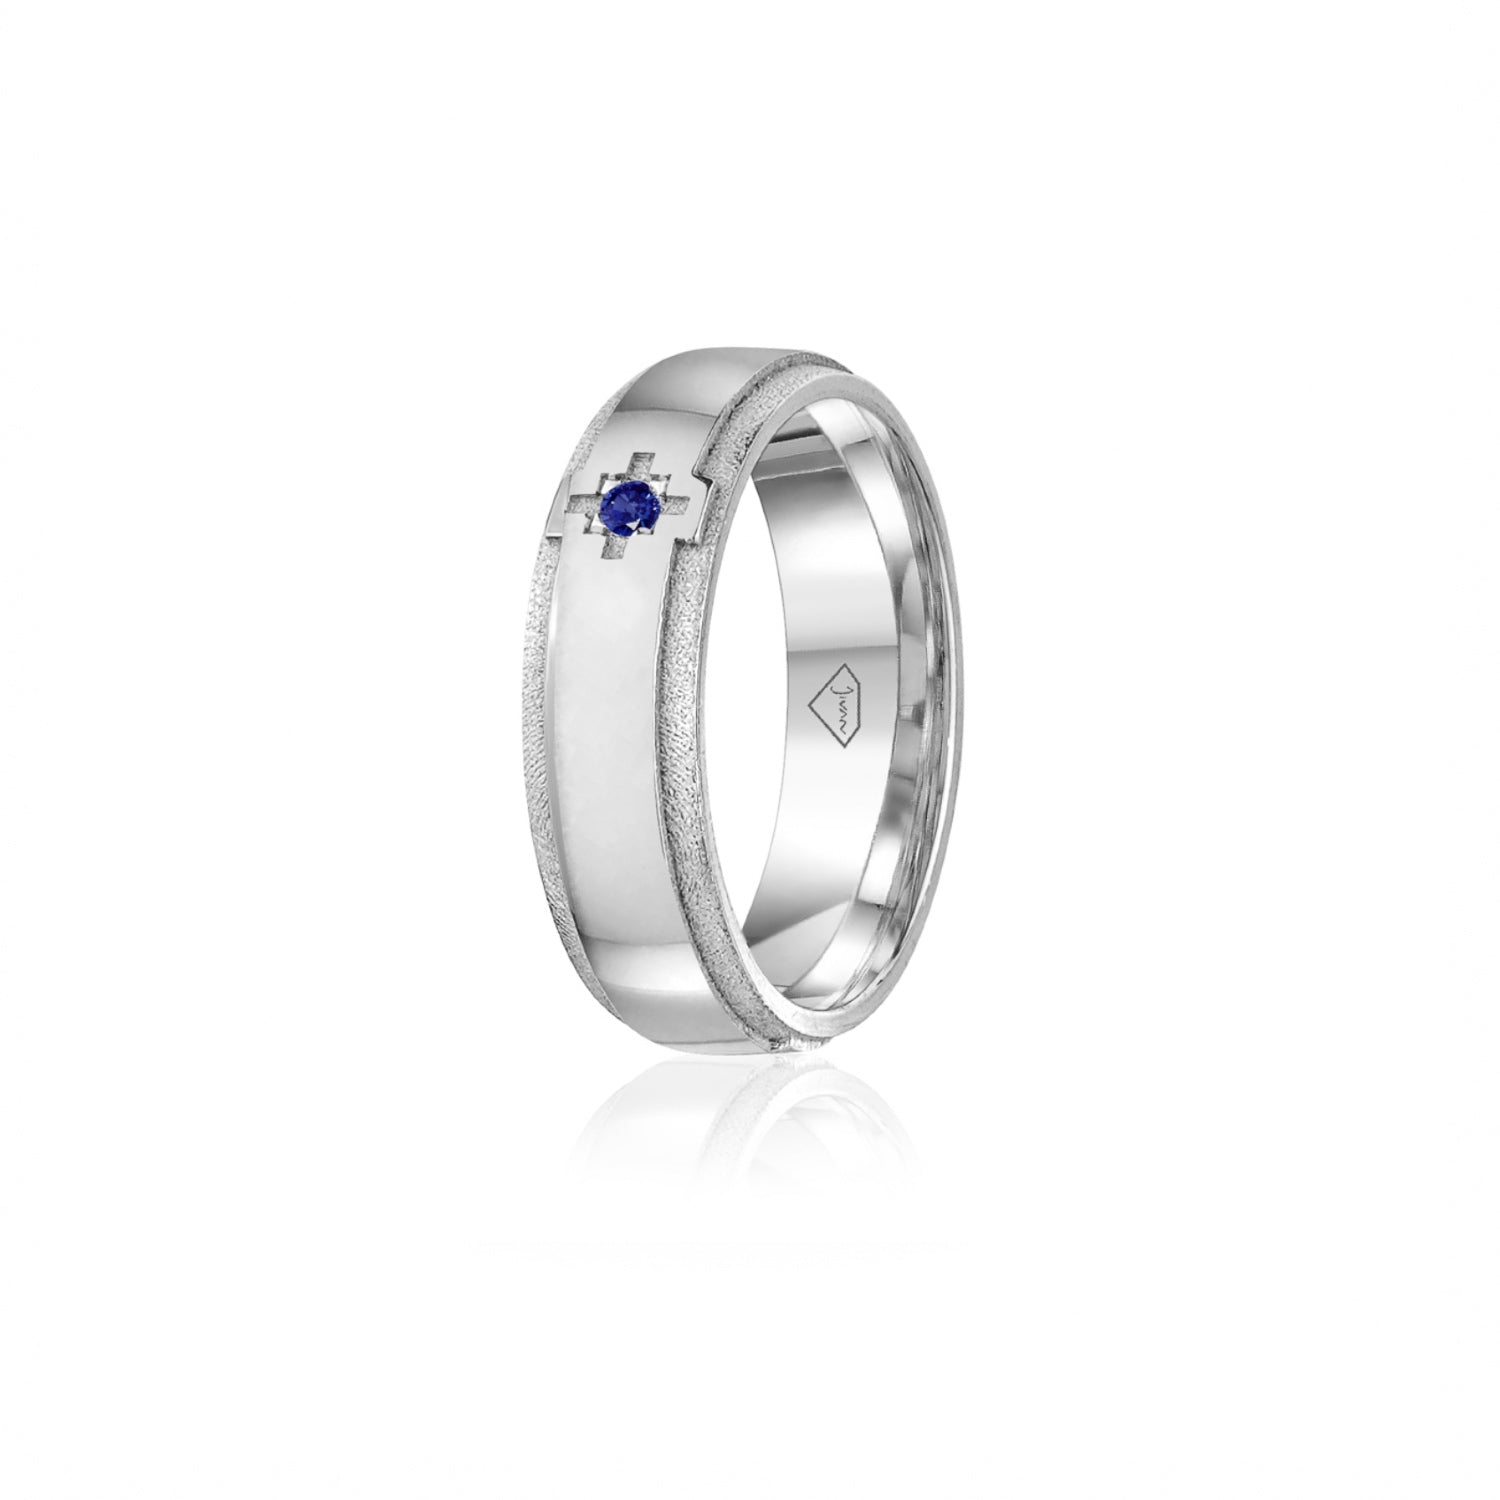 Sapphire Accent Polished Finish Bevelled Edge 8-9 mm Wedding Ring in White Gold